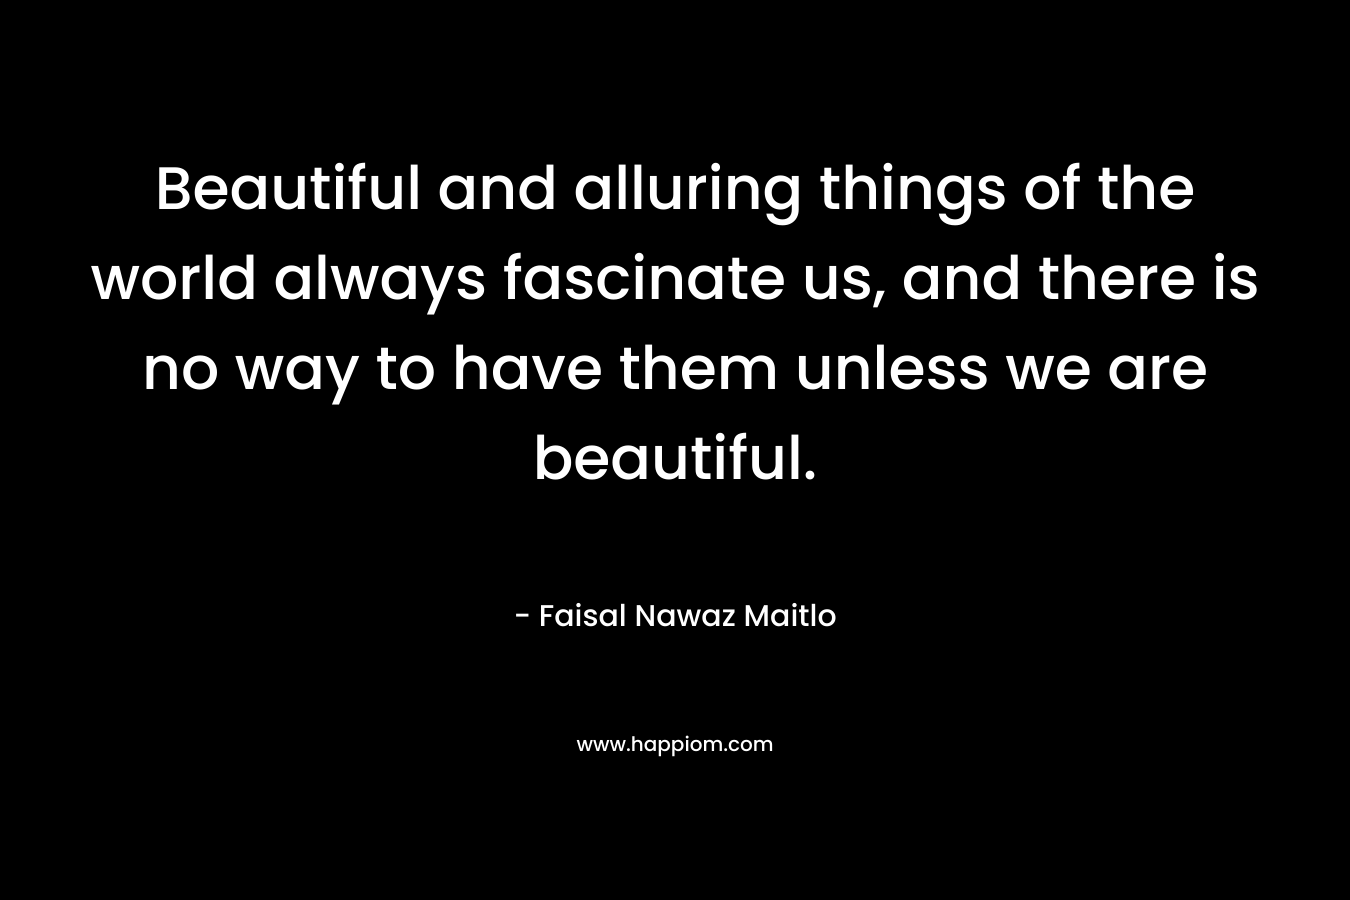 Beautiful and alluring things of the world always fascinate us, and there is no way to have them unless we are beautiful.